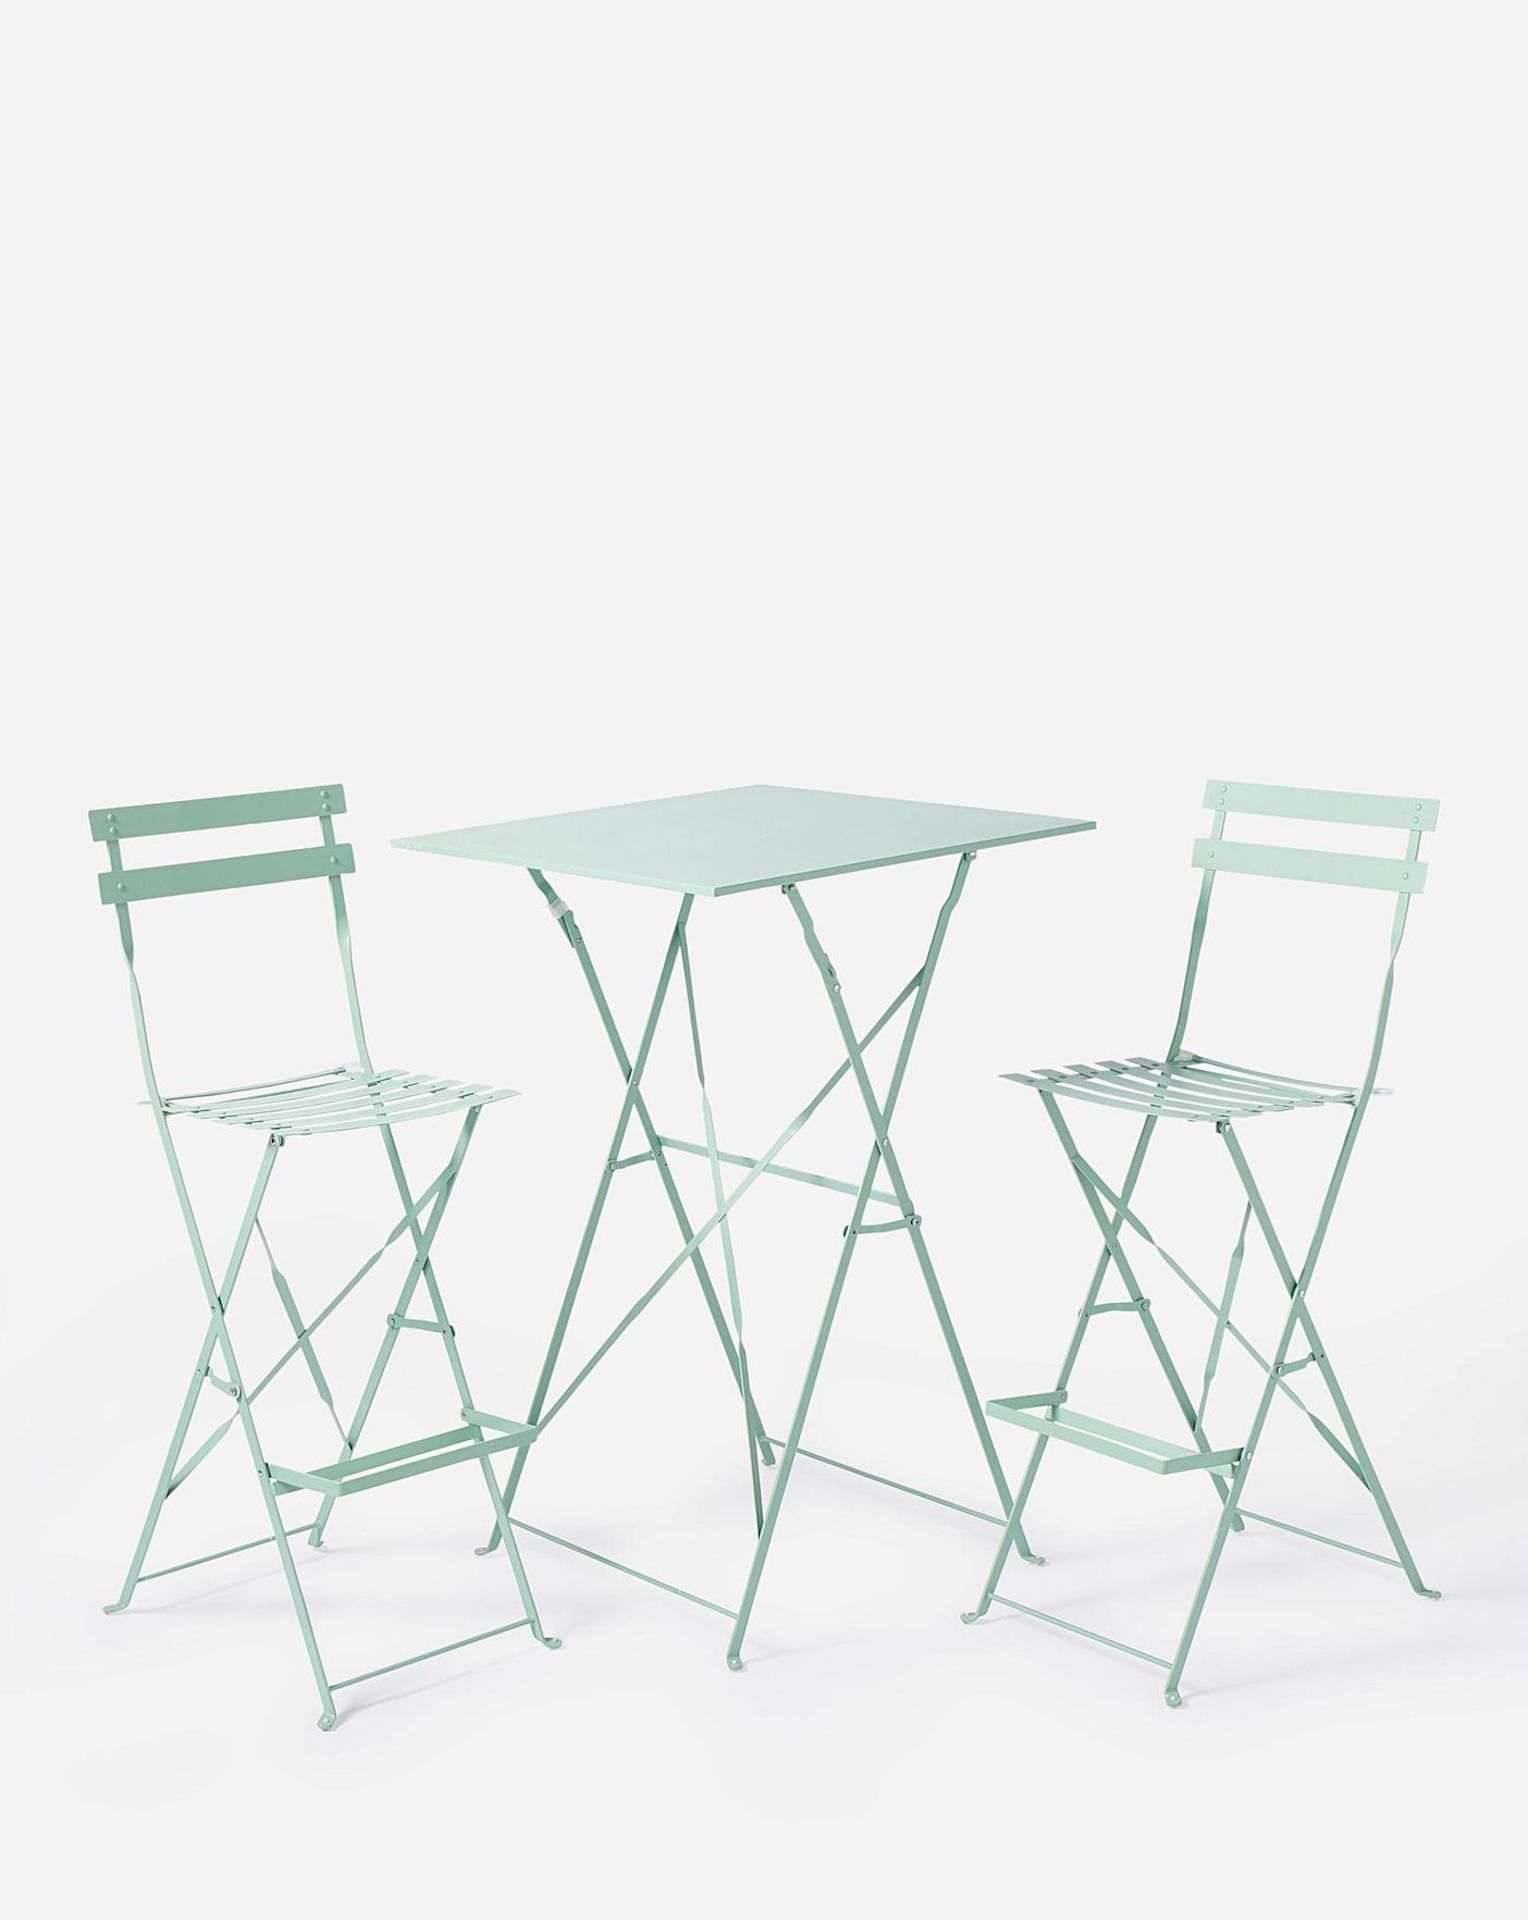 TRADE PALLET TO CONTAIN 6x BRAND NEW Palma Bistro Bar Set GREEN. RRP £159 EACH. Liven up your - Image 3 of 3